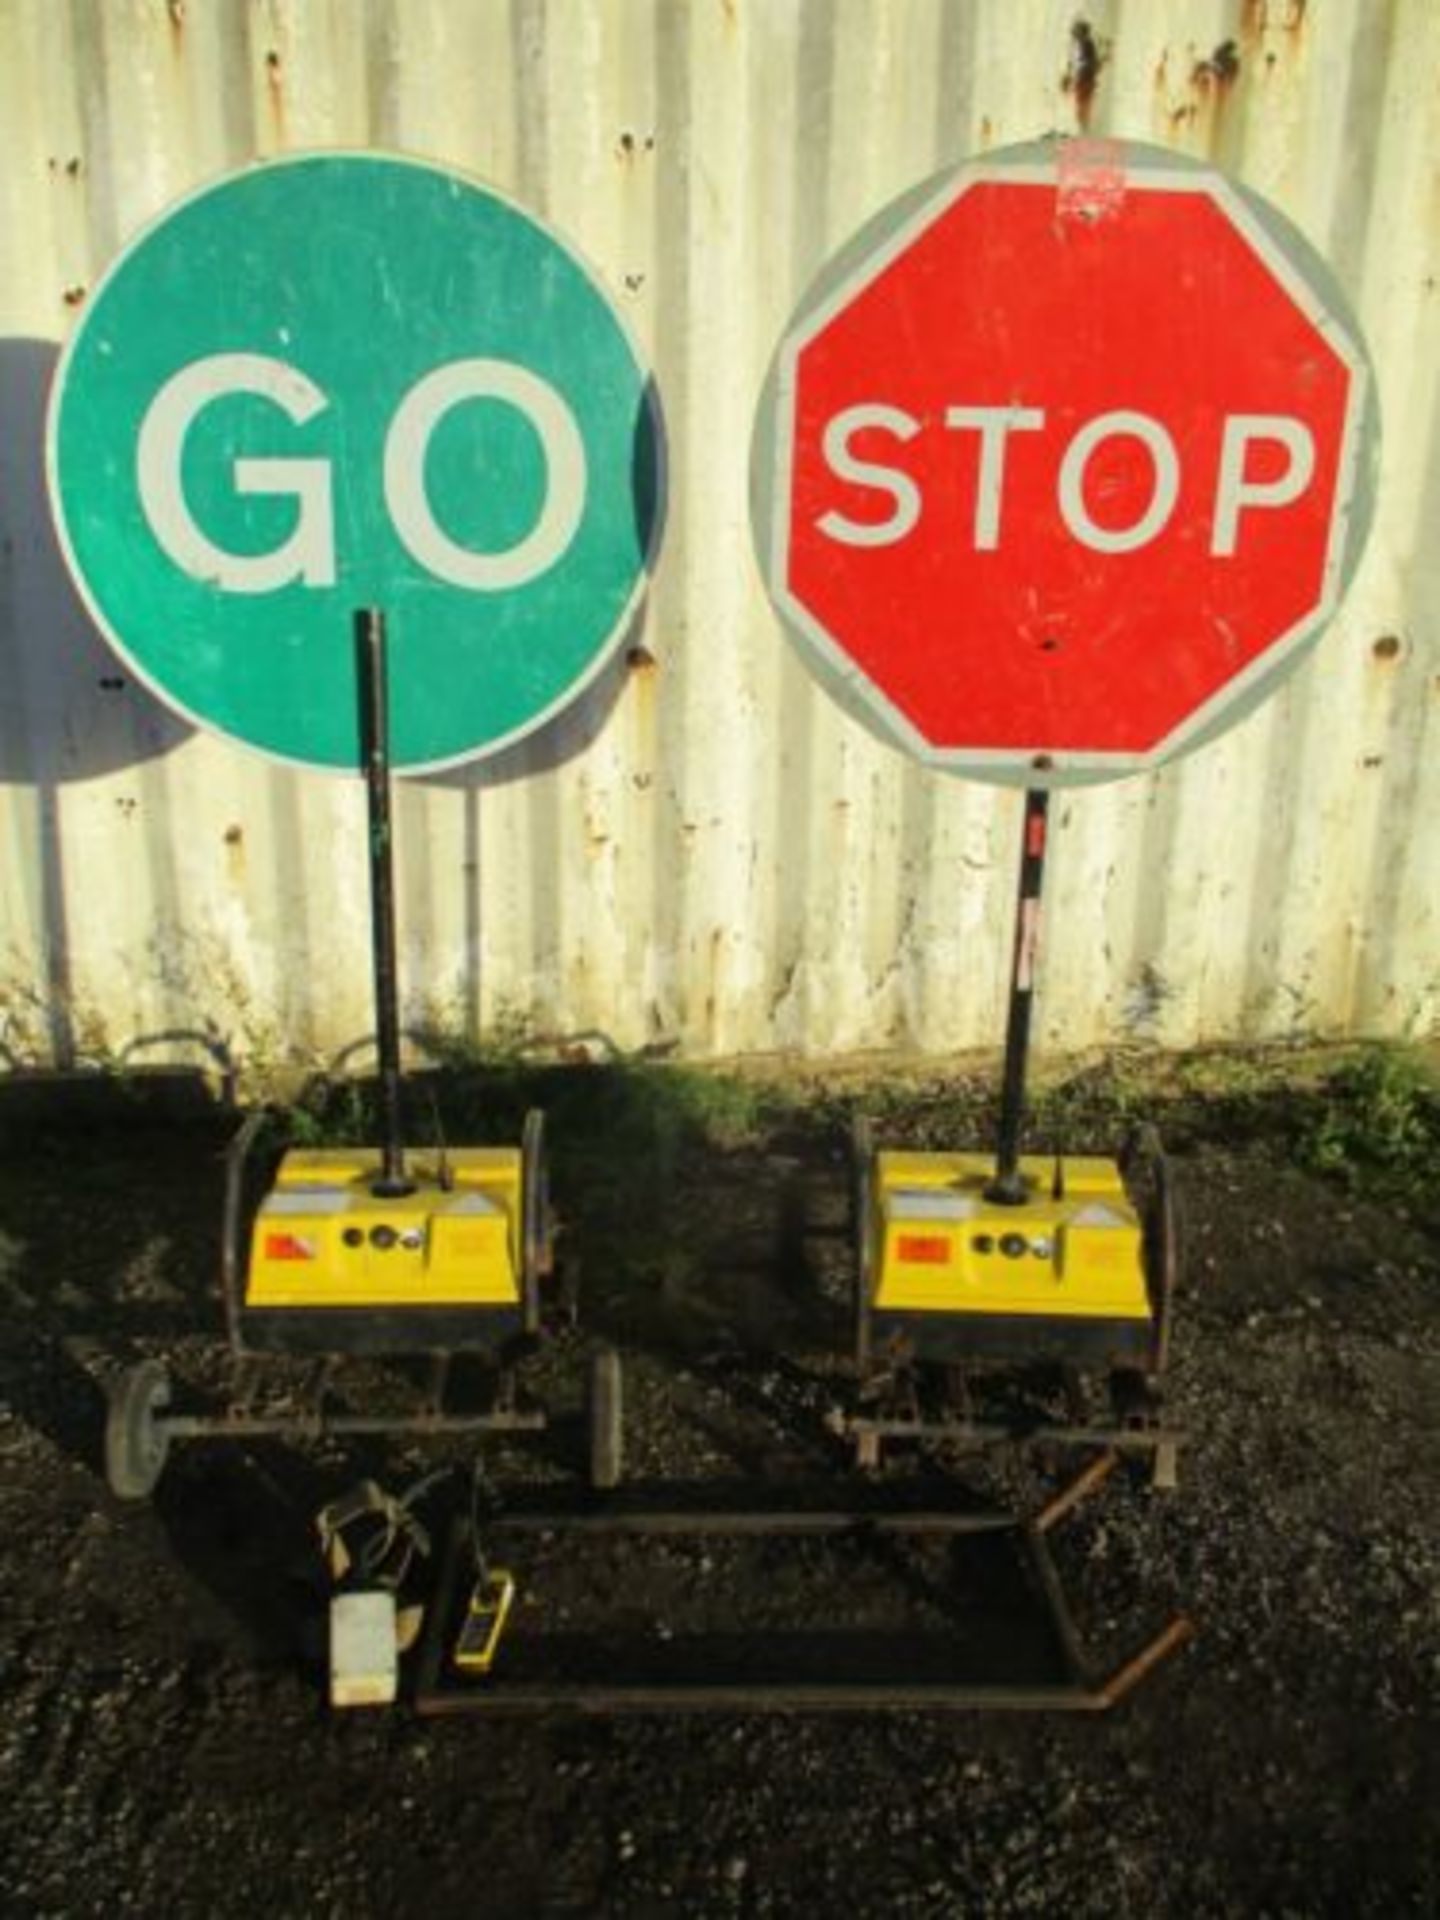 PIKE ROBOSIGN STOP GO BOARDS TRAFFIC LIGHTS SIGN LIGHT BATTERY 2 WAY - Image 3 of 4